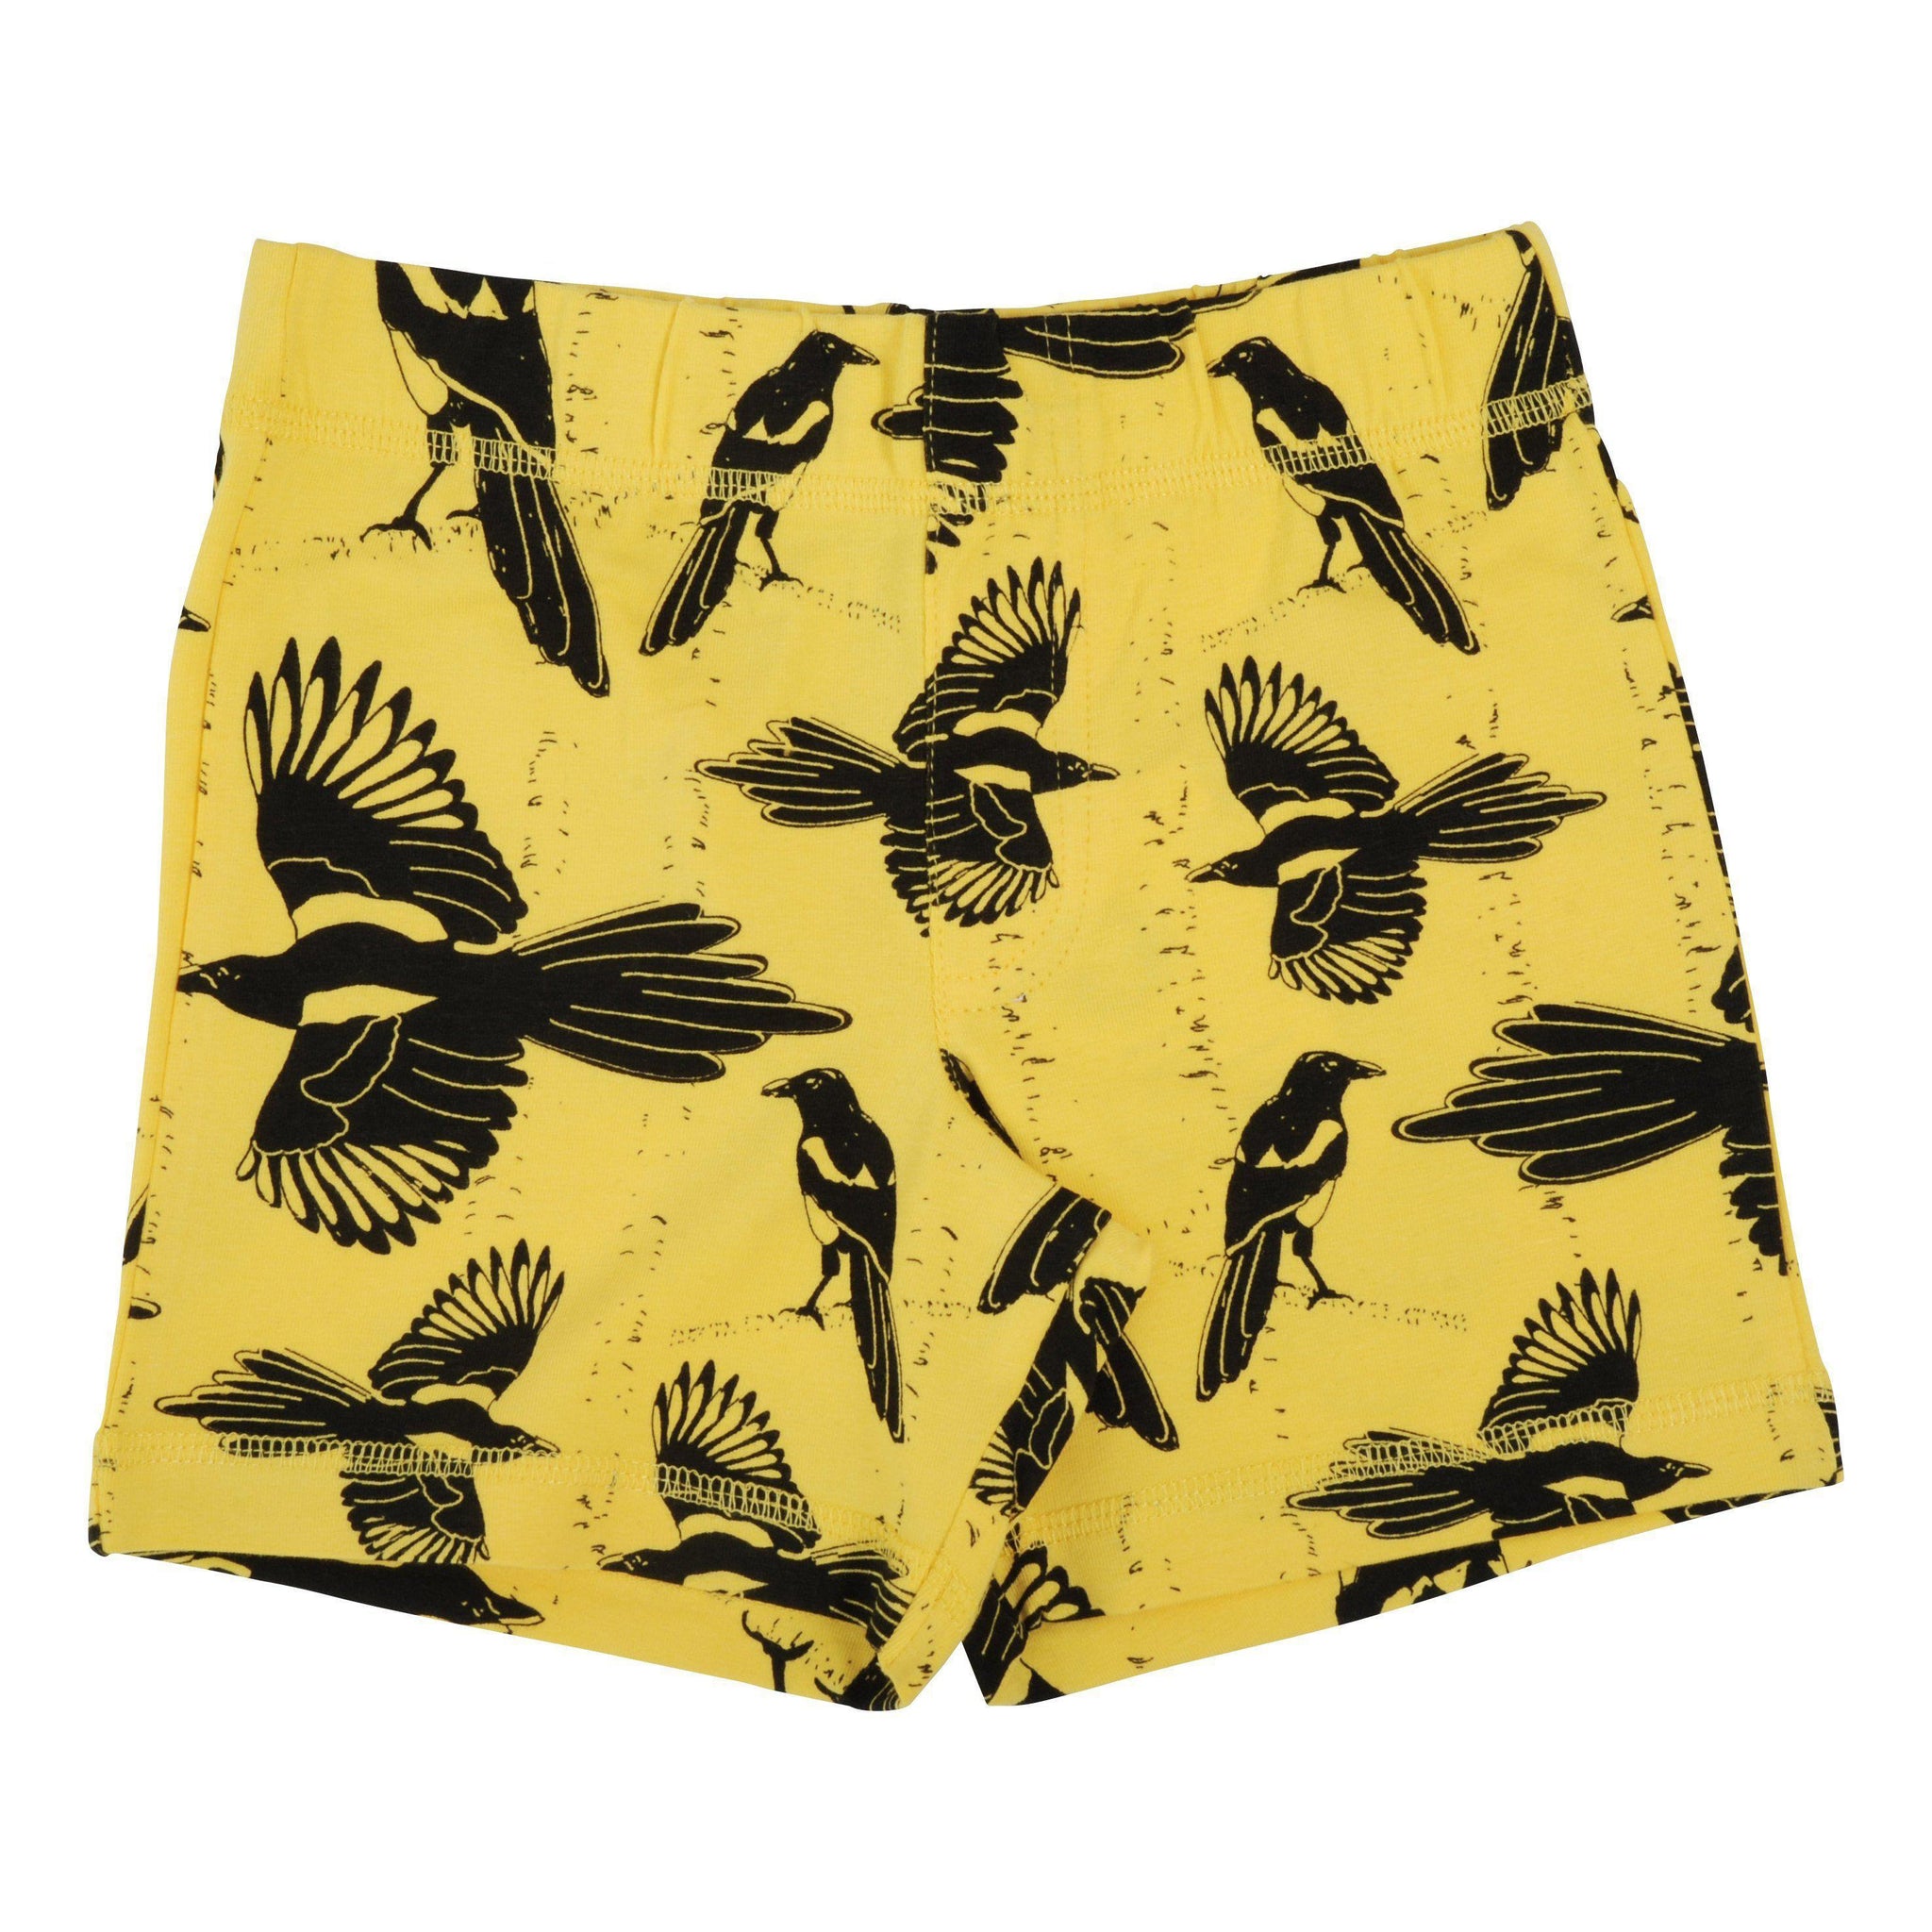 More than a Fling - Pica Pica Shorts (Aspen Gold) (1-2 Years)